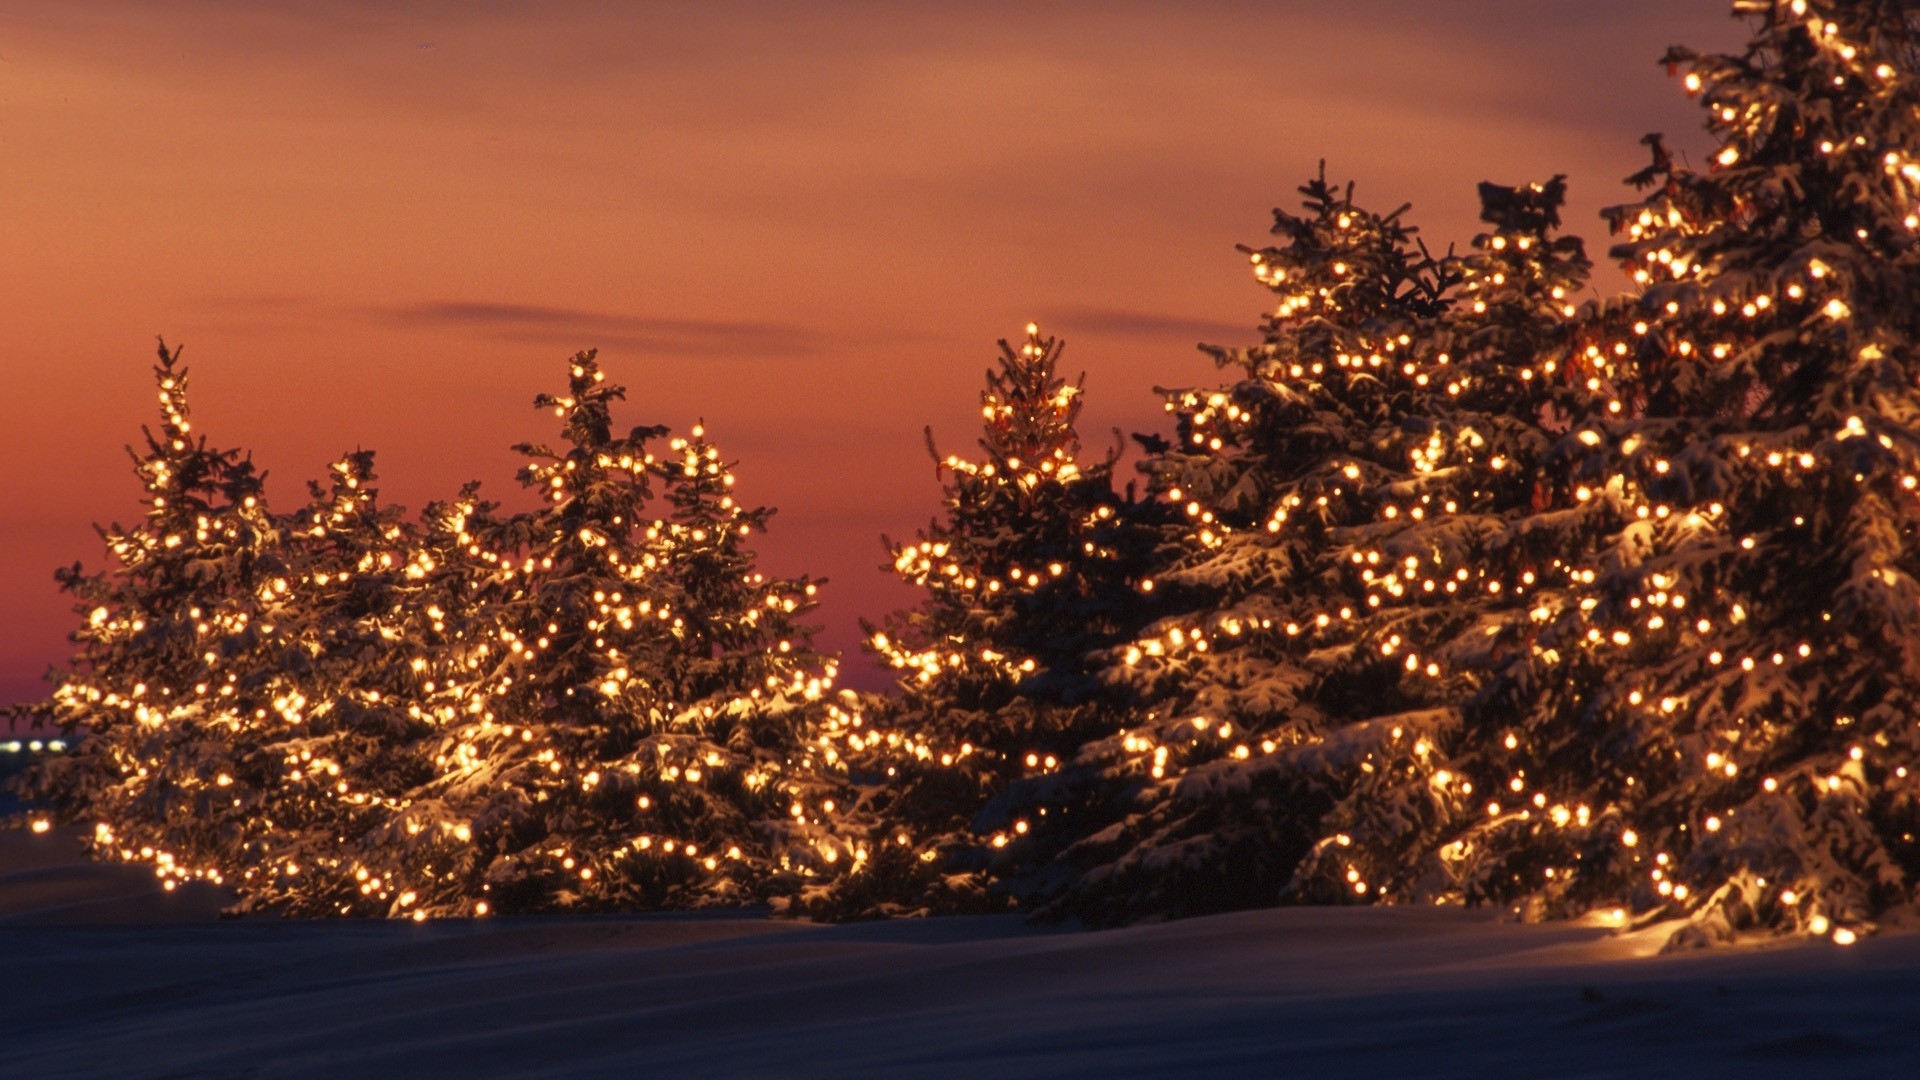 Christmas winter backgrounds